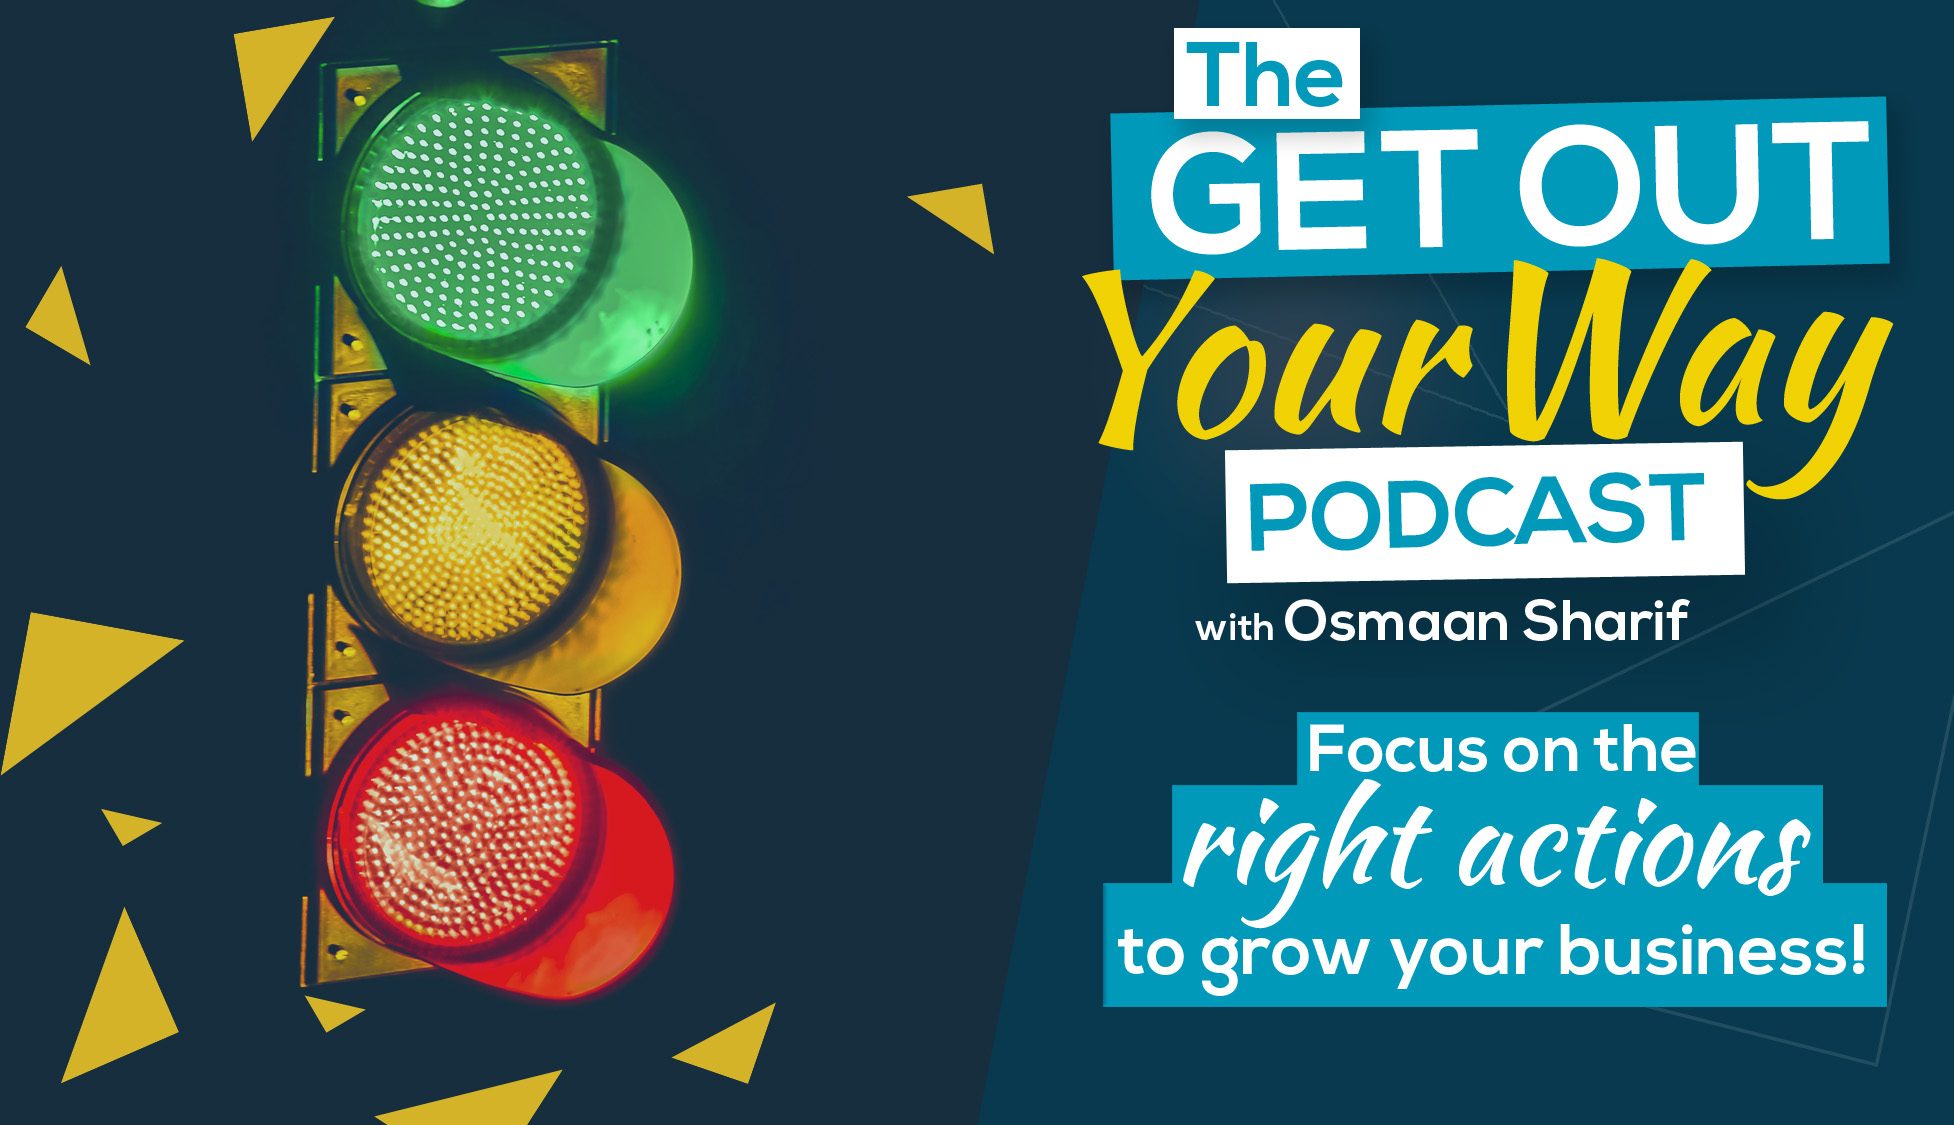 Focus on the right actions to grow your business